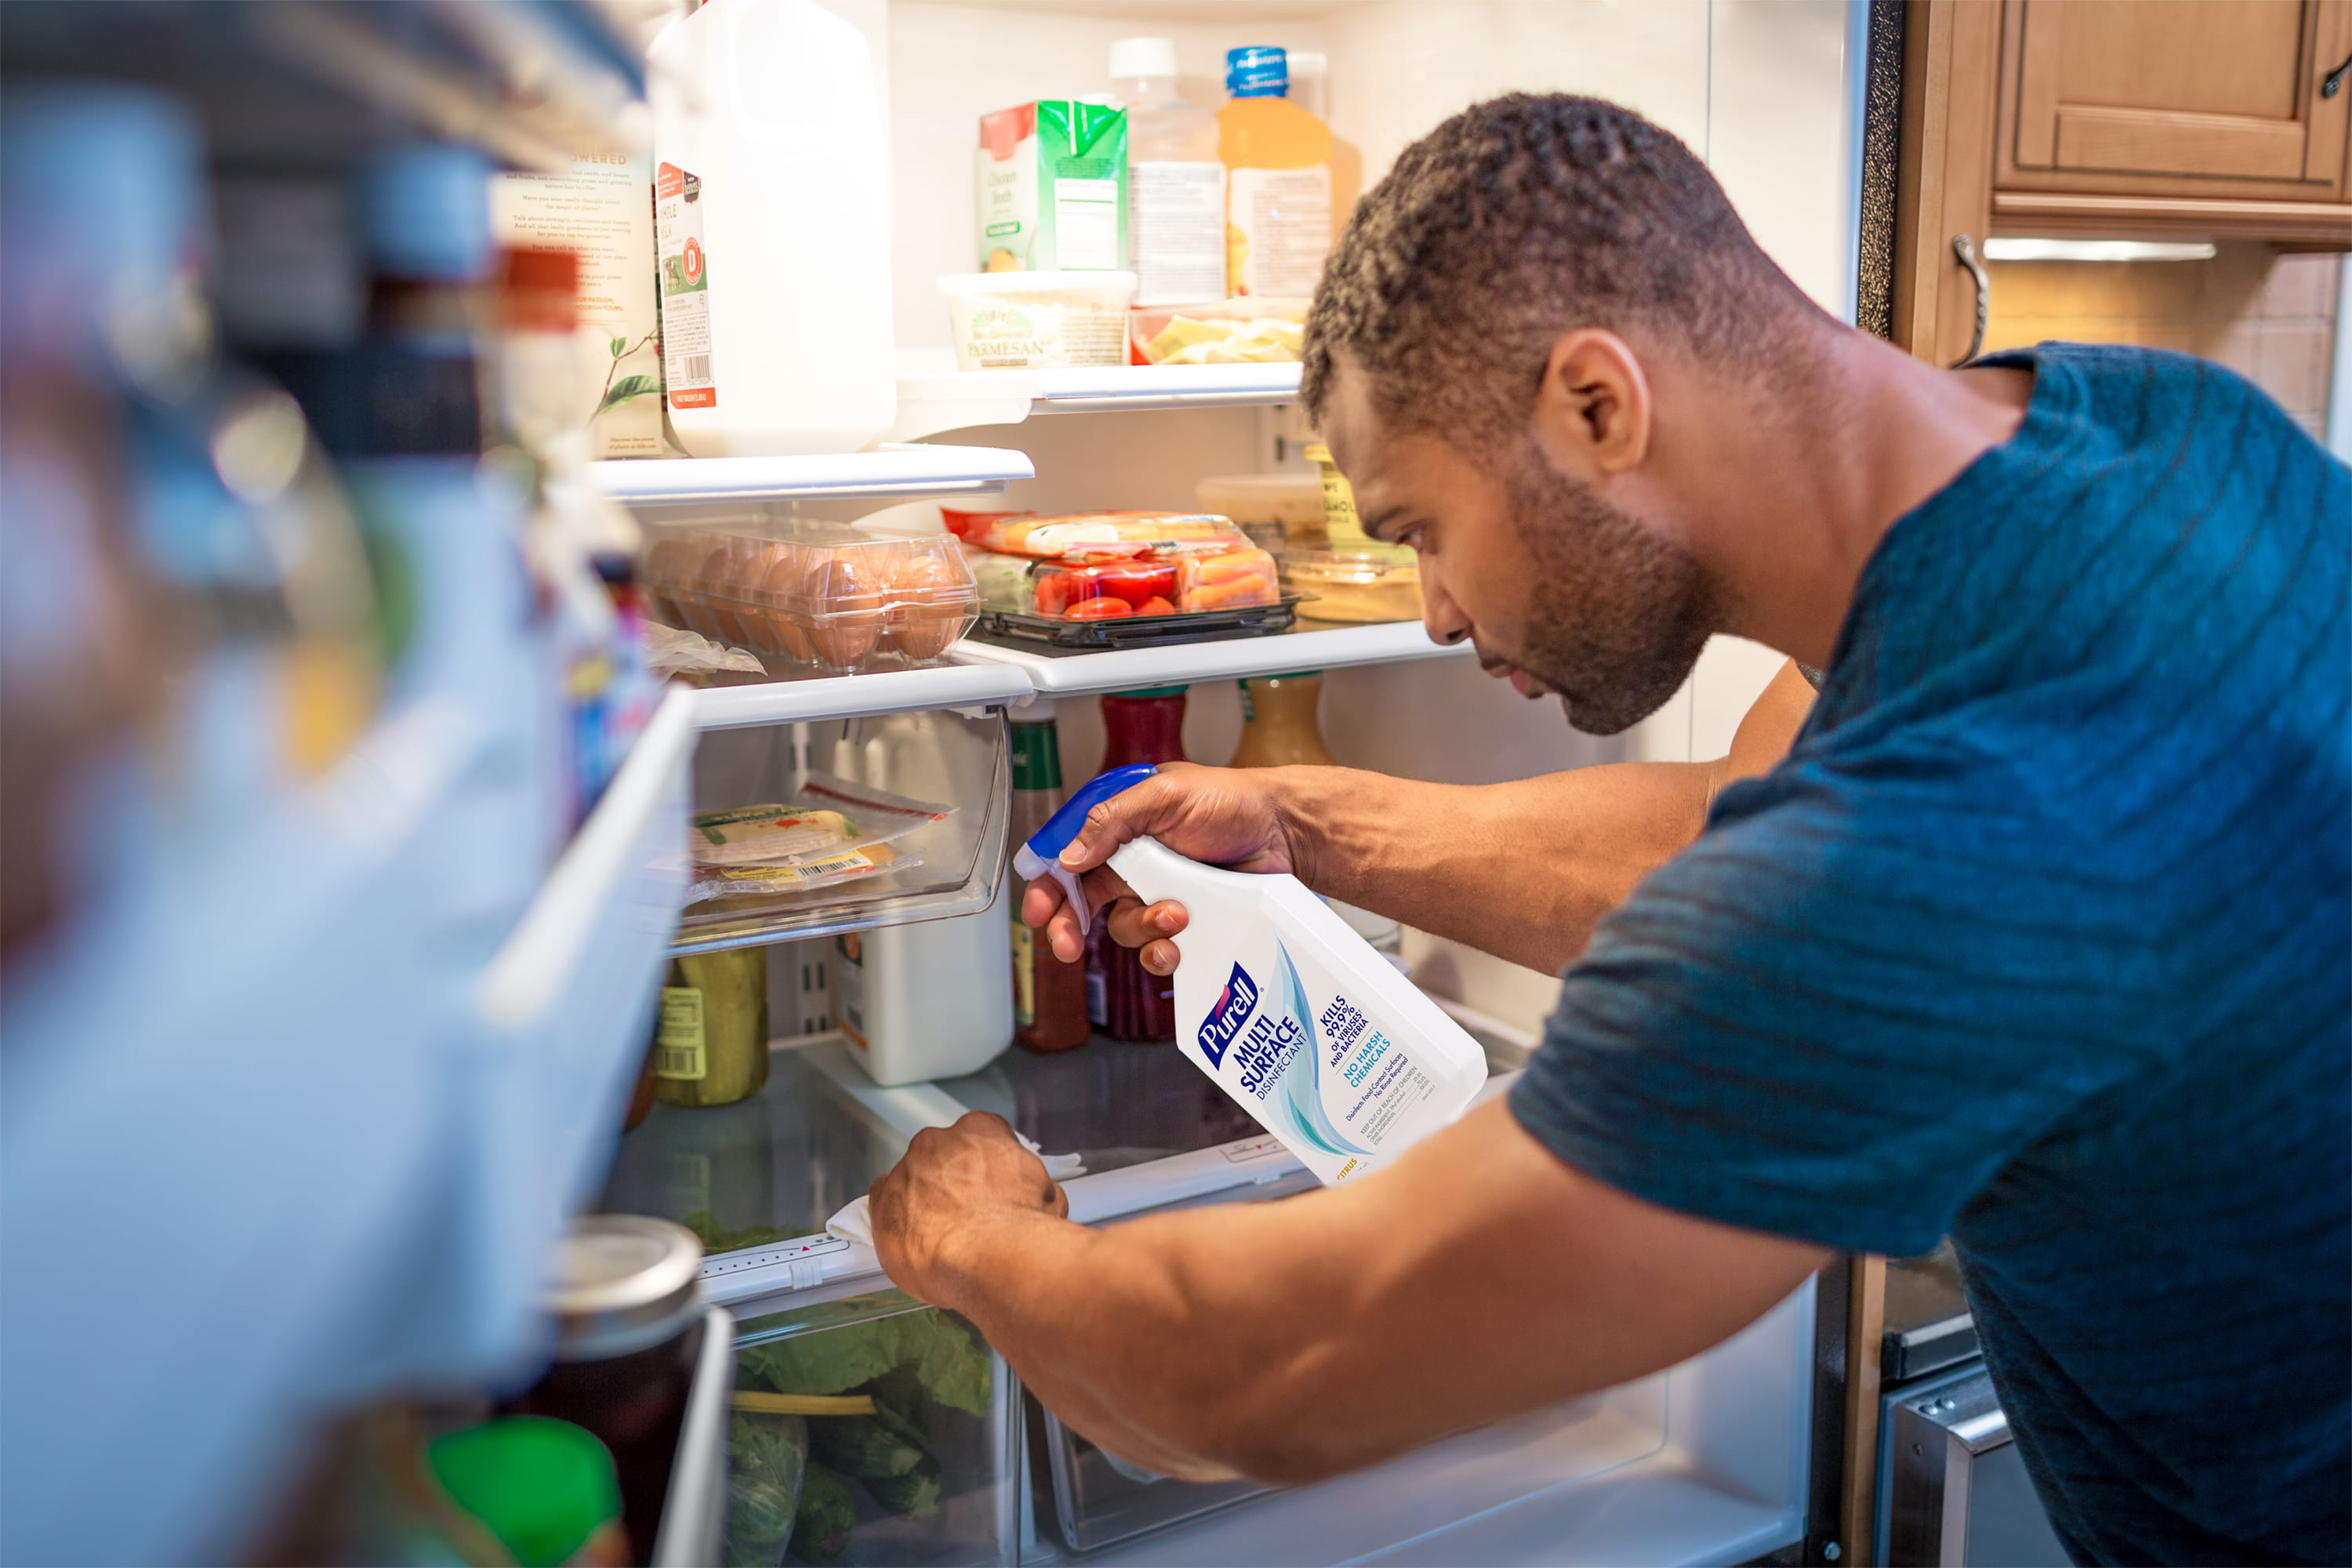 A man cleans his fridge with PURELL Surface Disinfectant